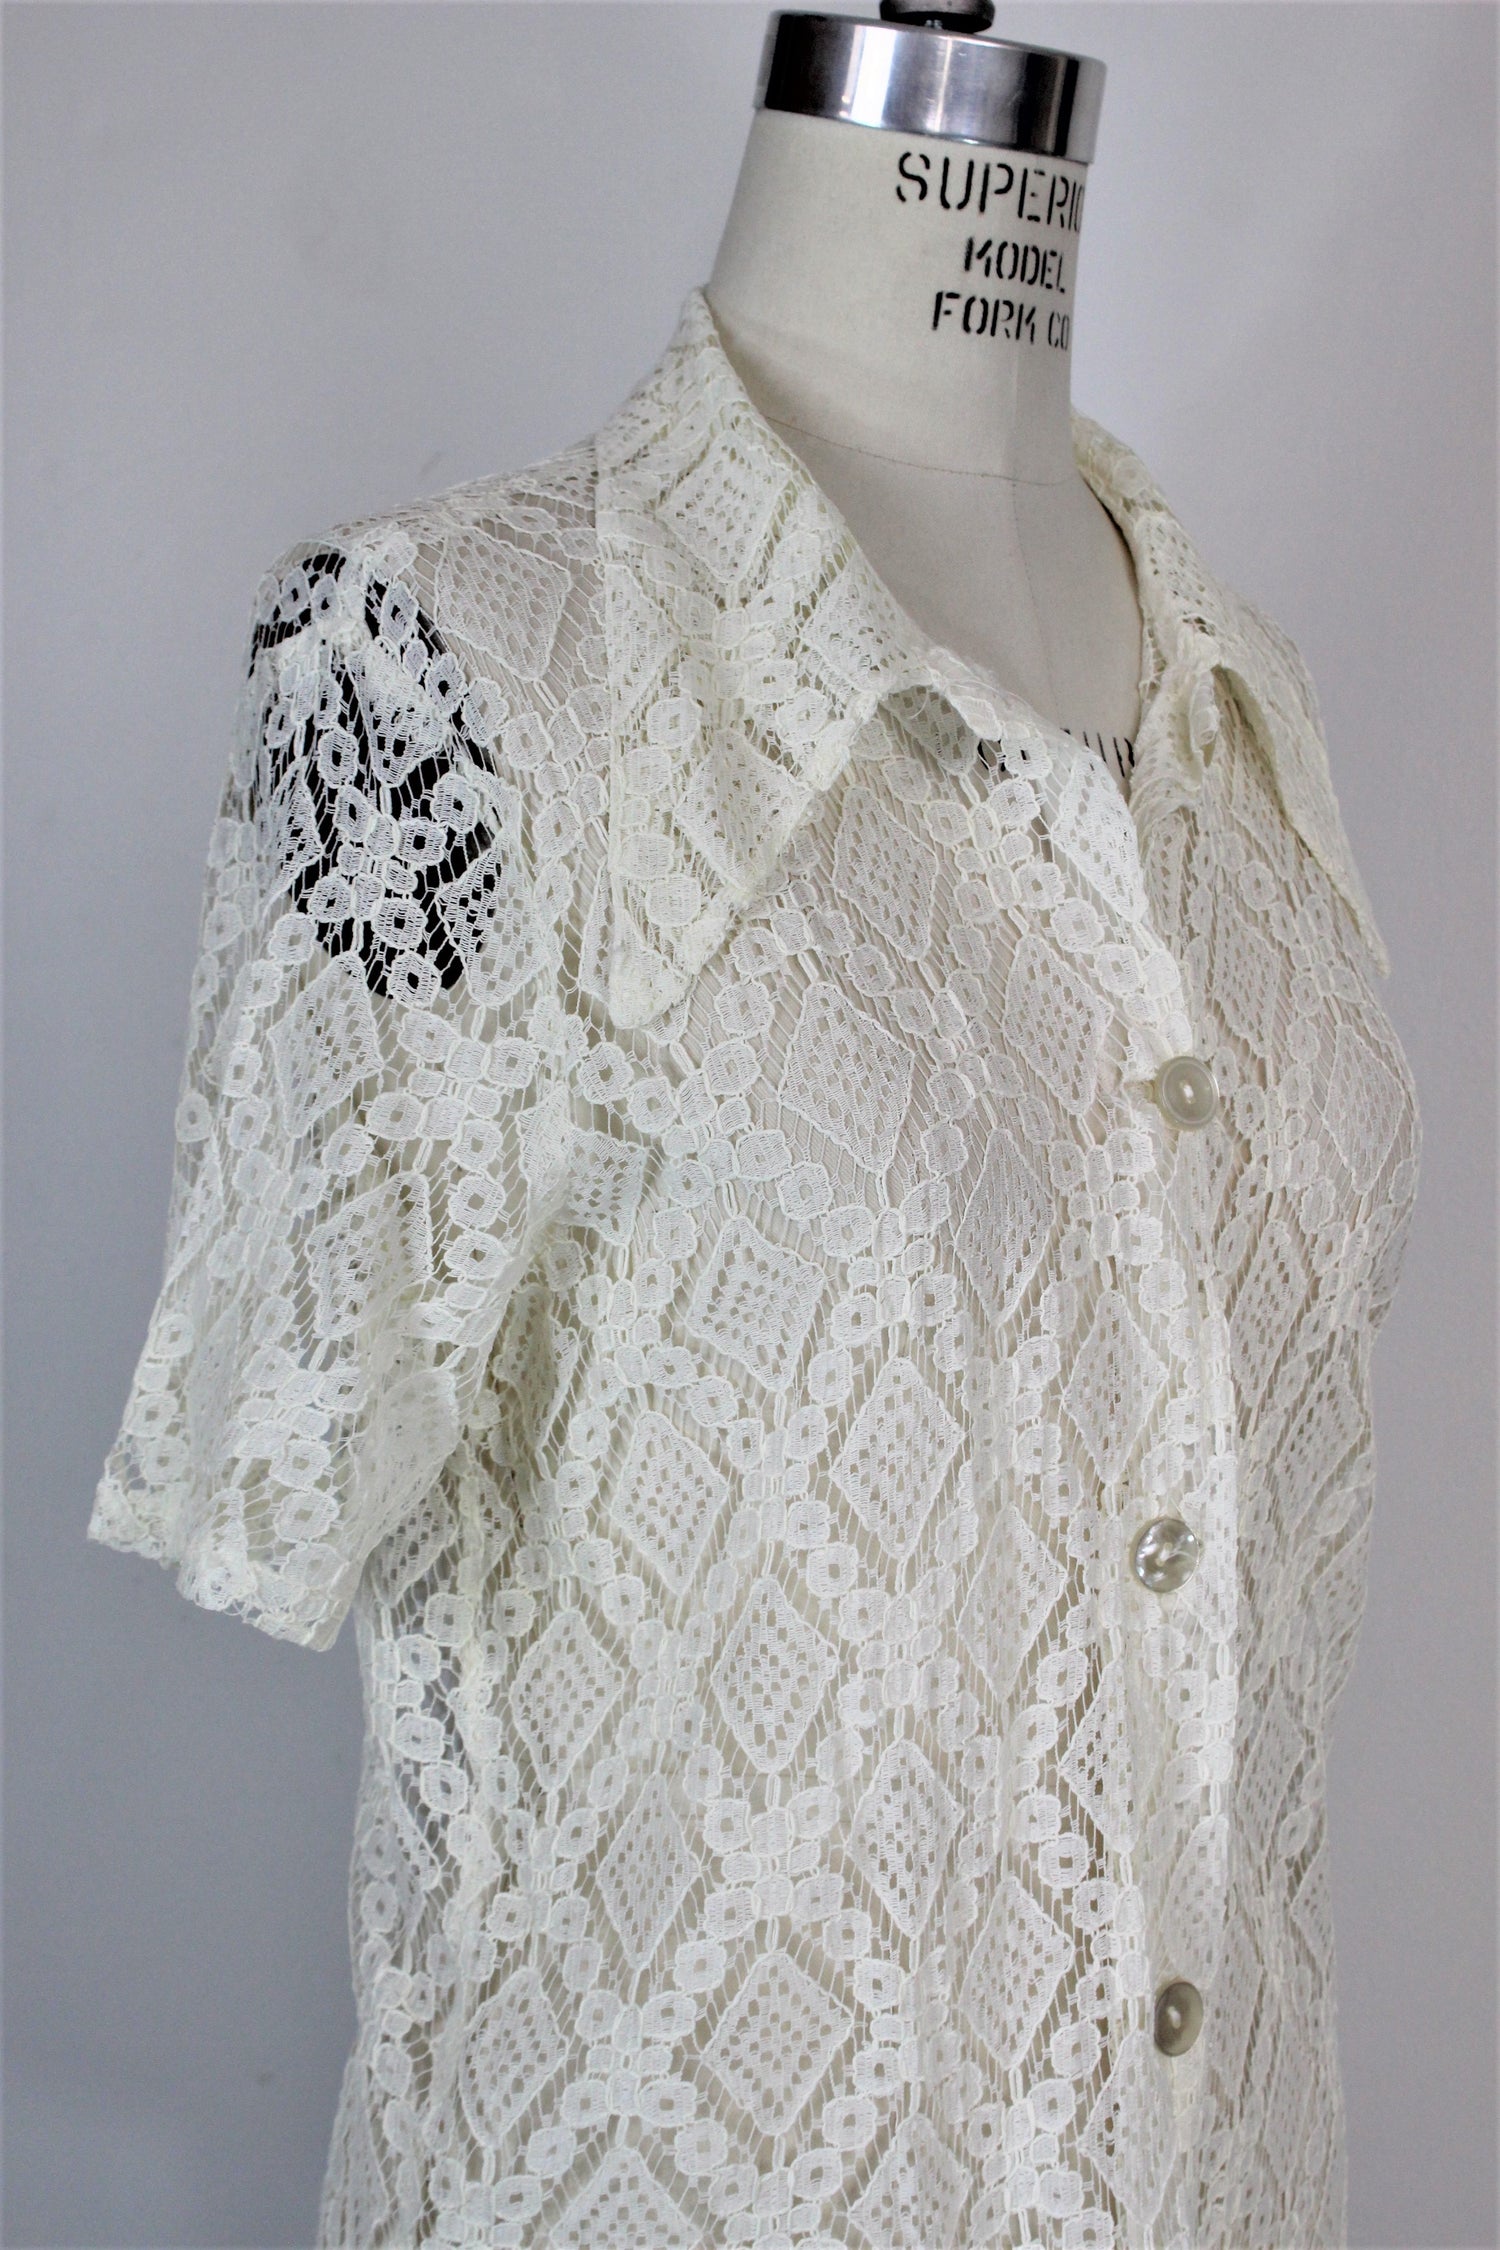 Vintage 1970s White Lace Blouse With Short Sleeves – Toadstool Farm Vintage